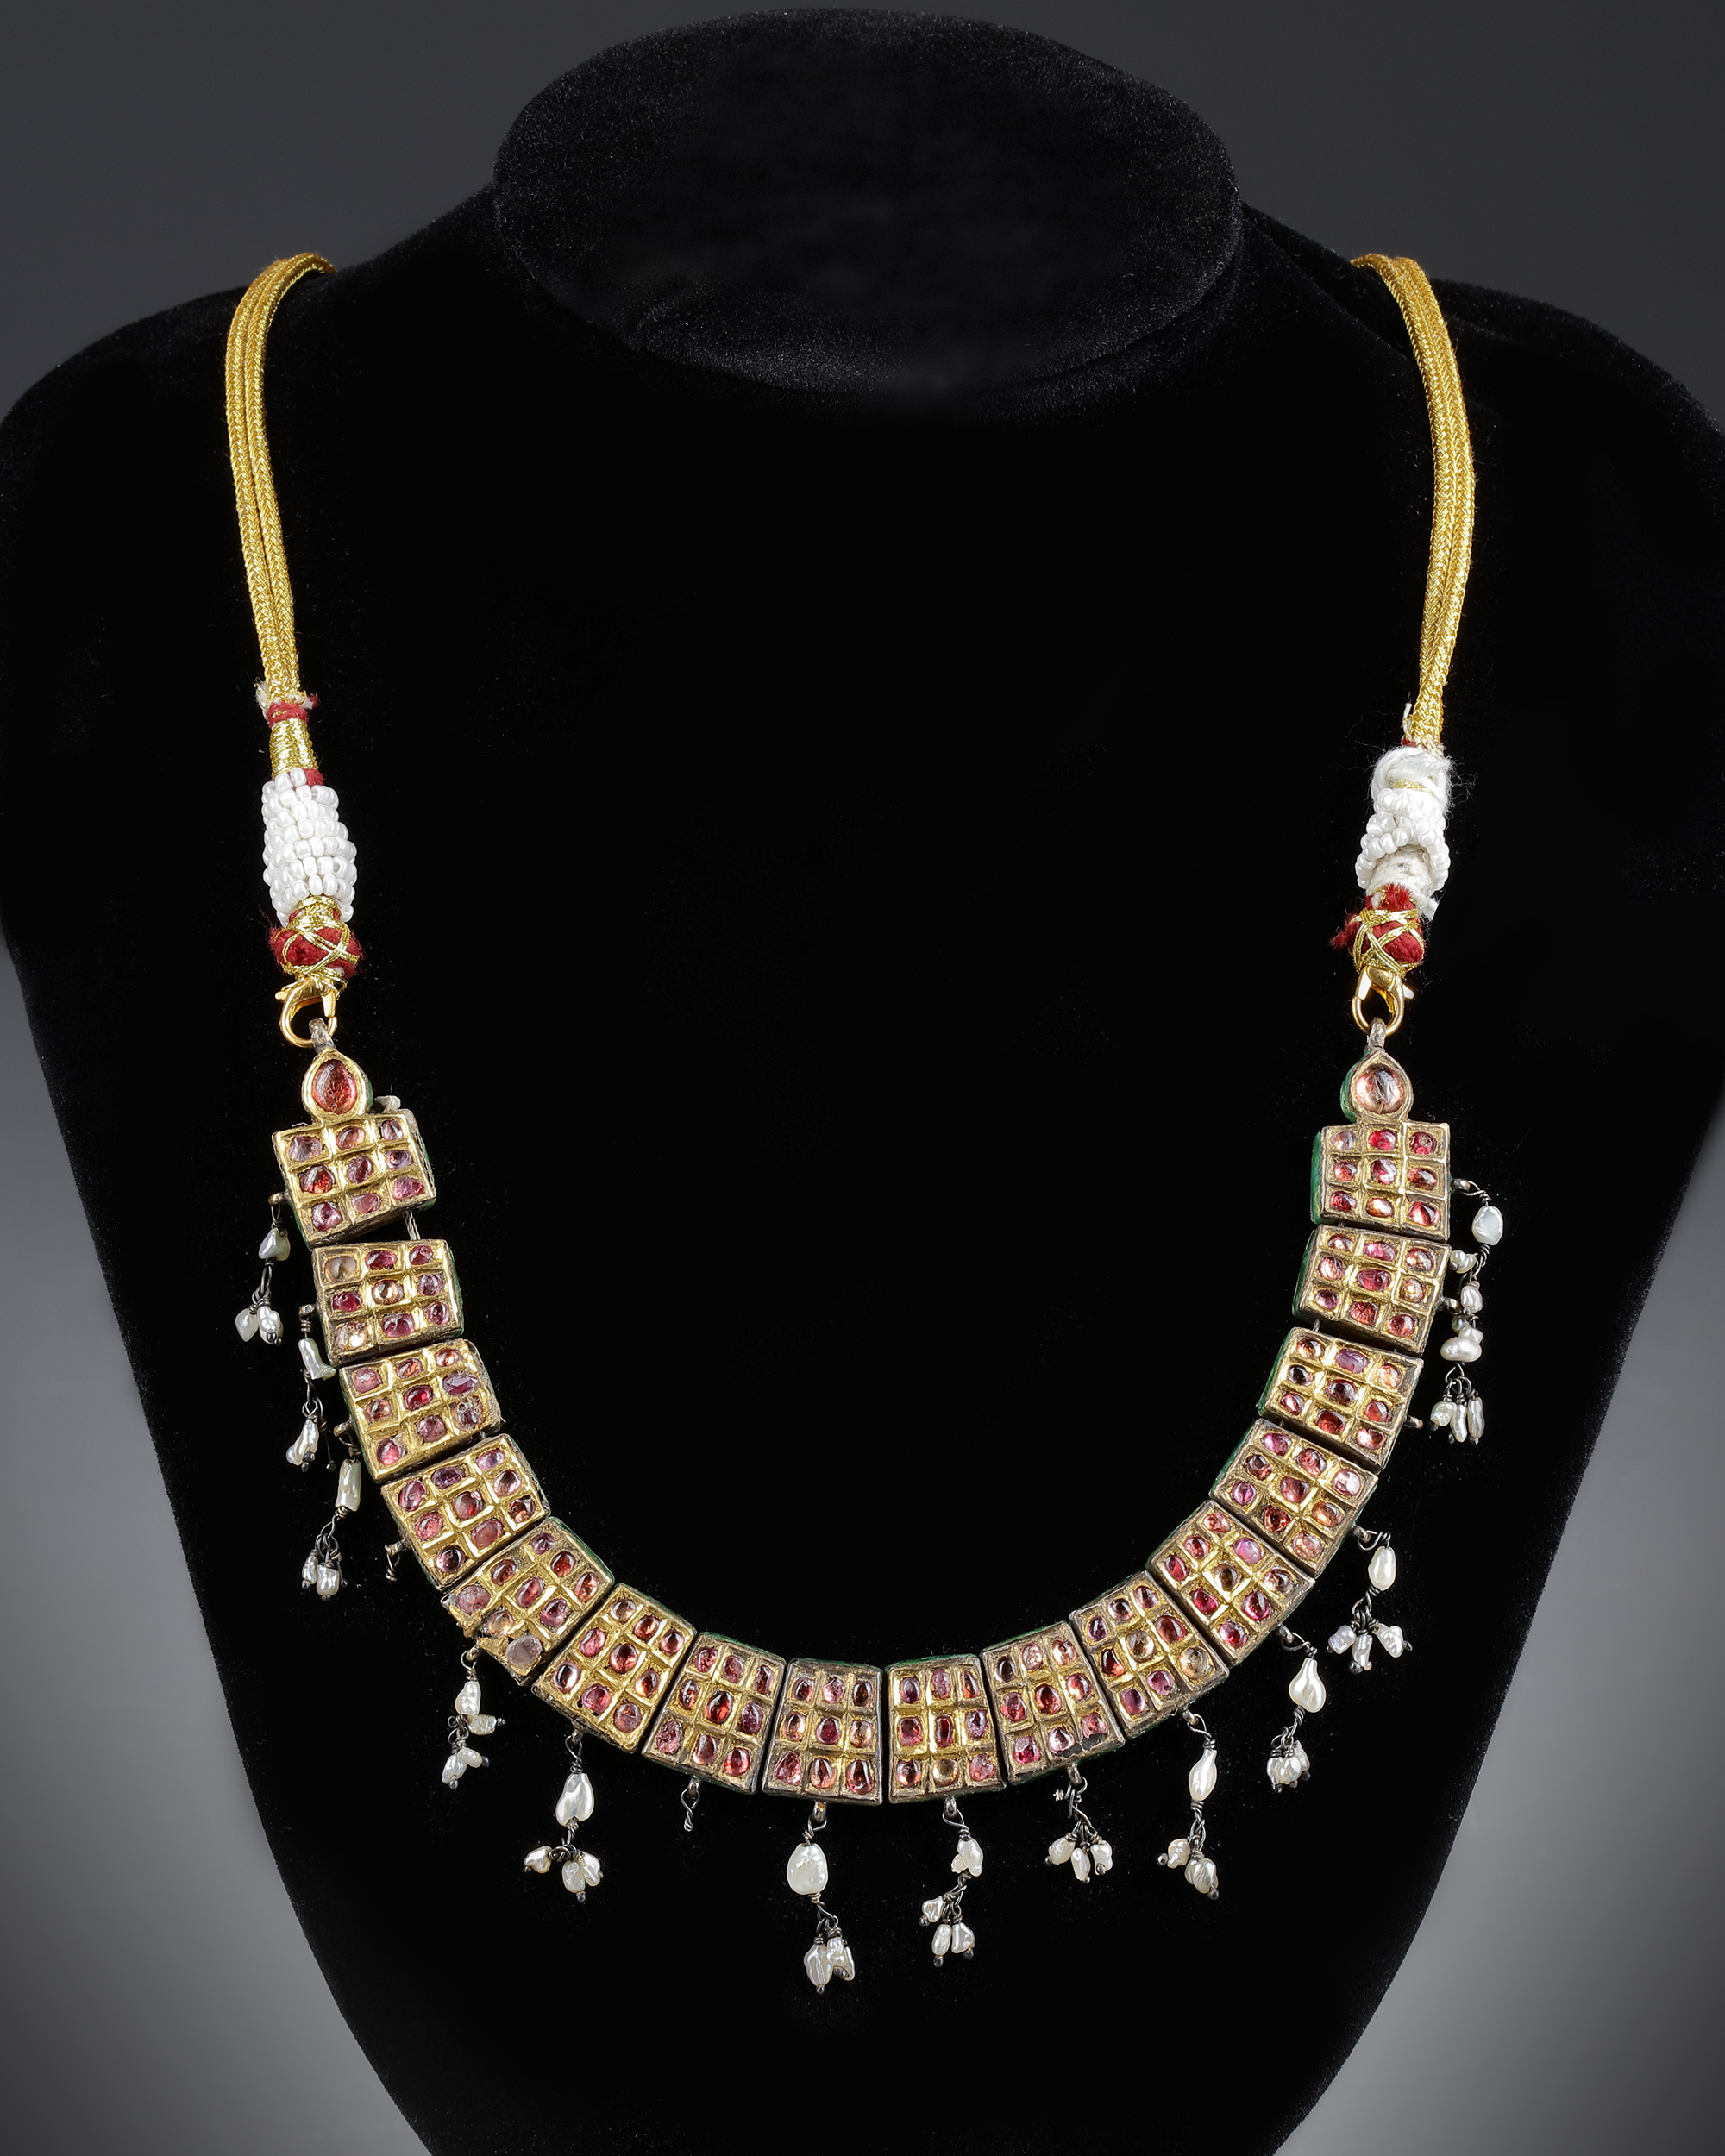 A MUGHAL GEM-SET ENAMELED GOLD NECKLACE, LATE 18TH CENTURY - Image 3 of 3